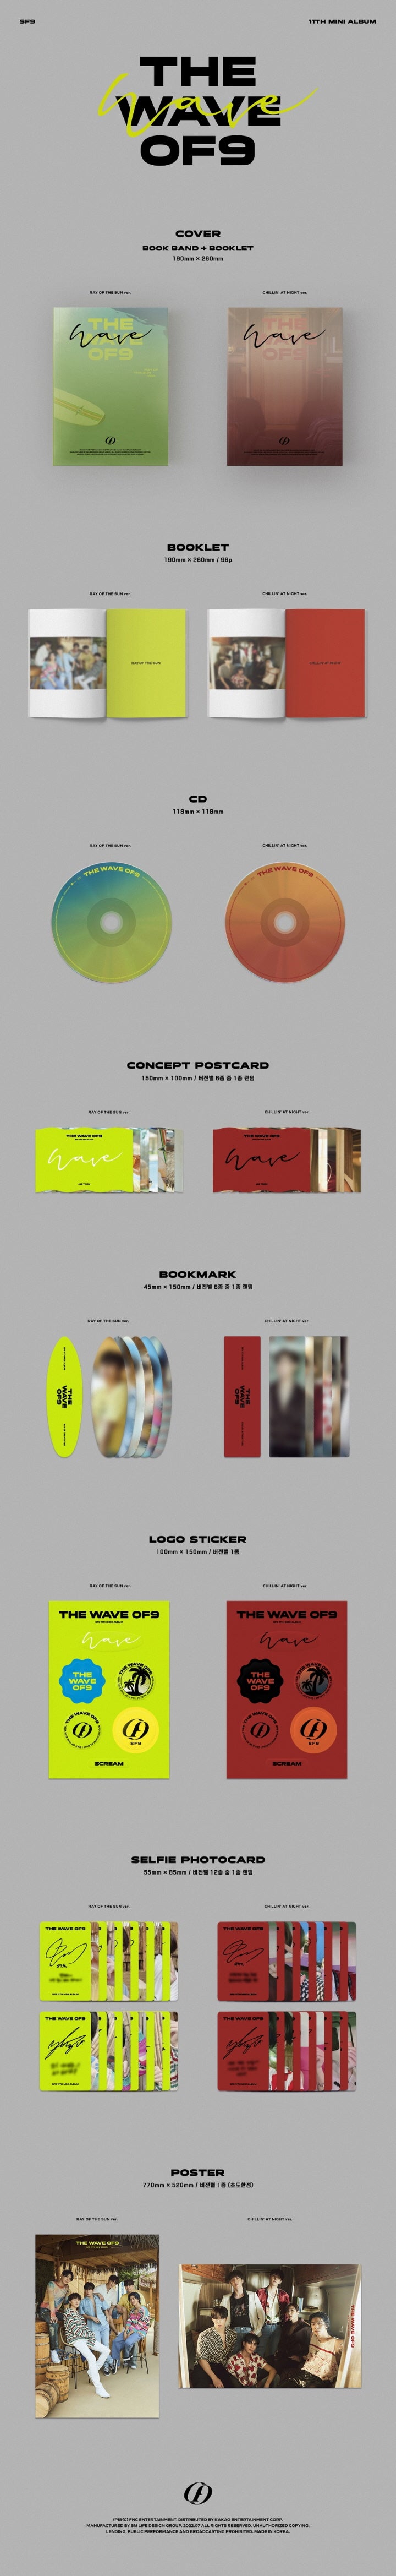 1 CD
1 Booklet (98 pages)
1 Concept Photo Card (random out of 6 types)
1 Bookmark (random out of 6 types)
1 Logo Sticker
1...